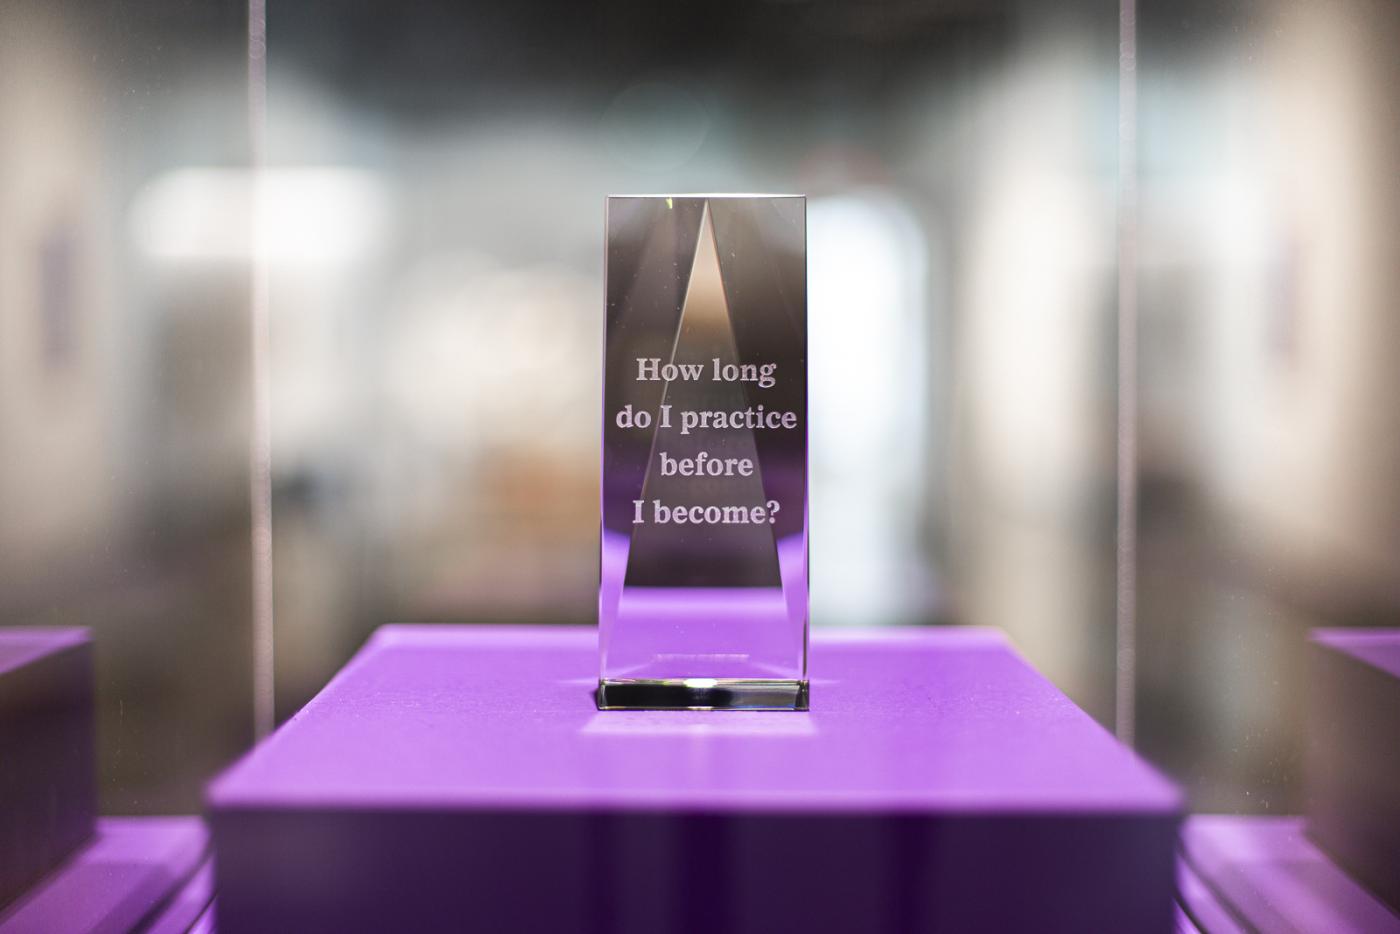 a trophy is displayed in a glass case with a purple bottom. the trophy reads "How long do I practice before I become?"